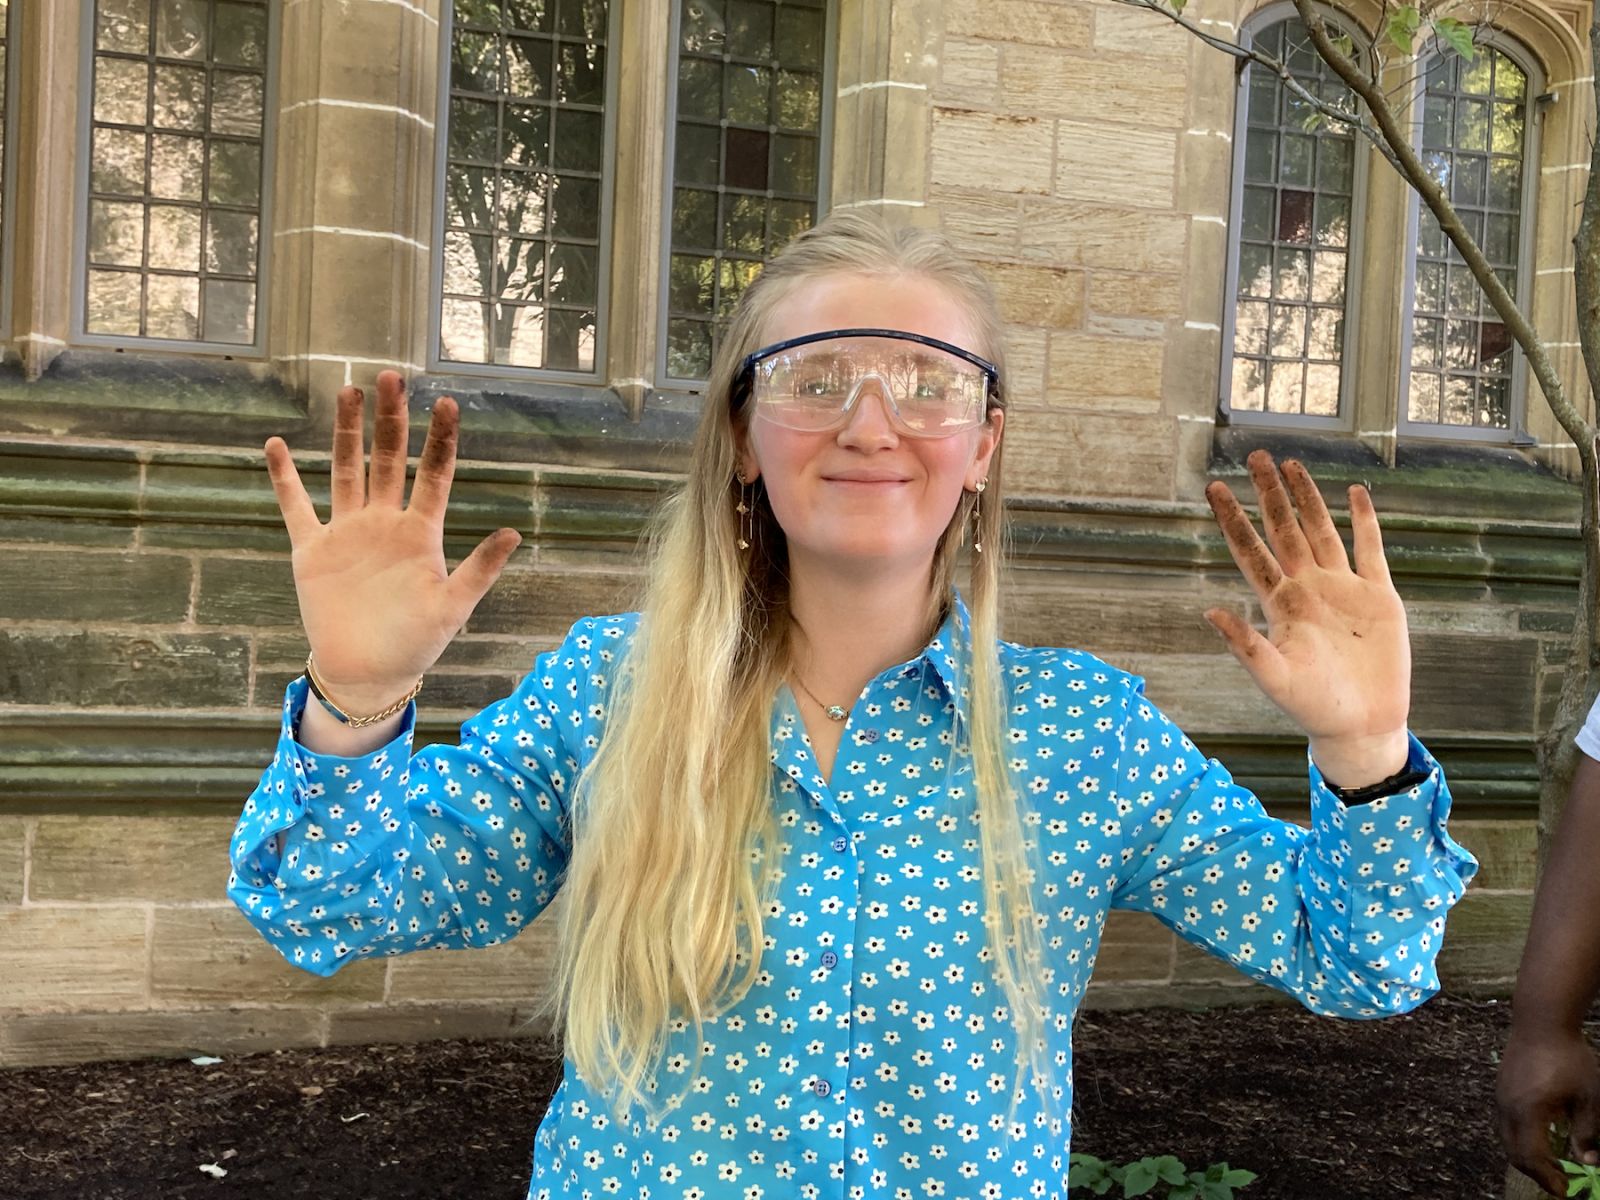 Photo of Yale student with dirt on her hands